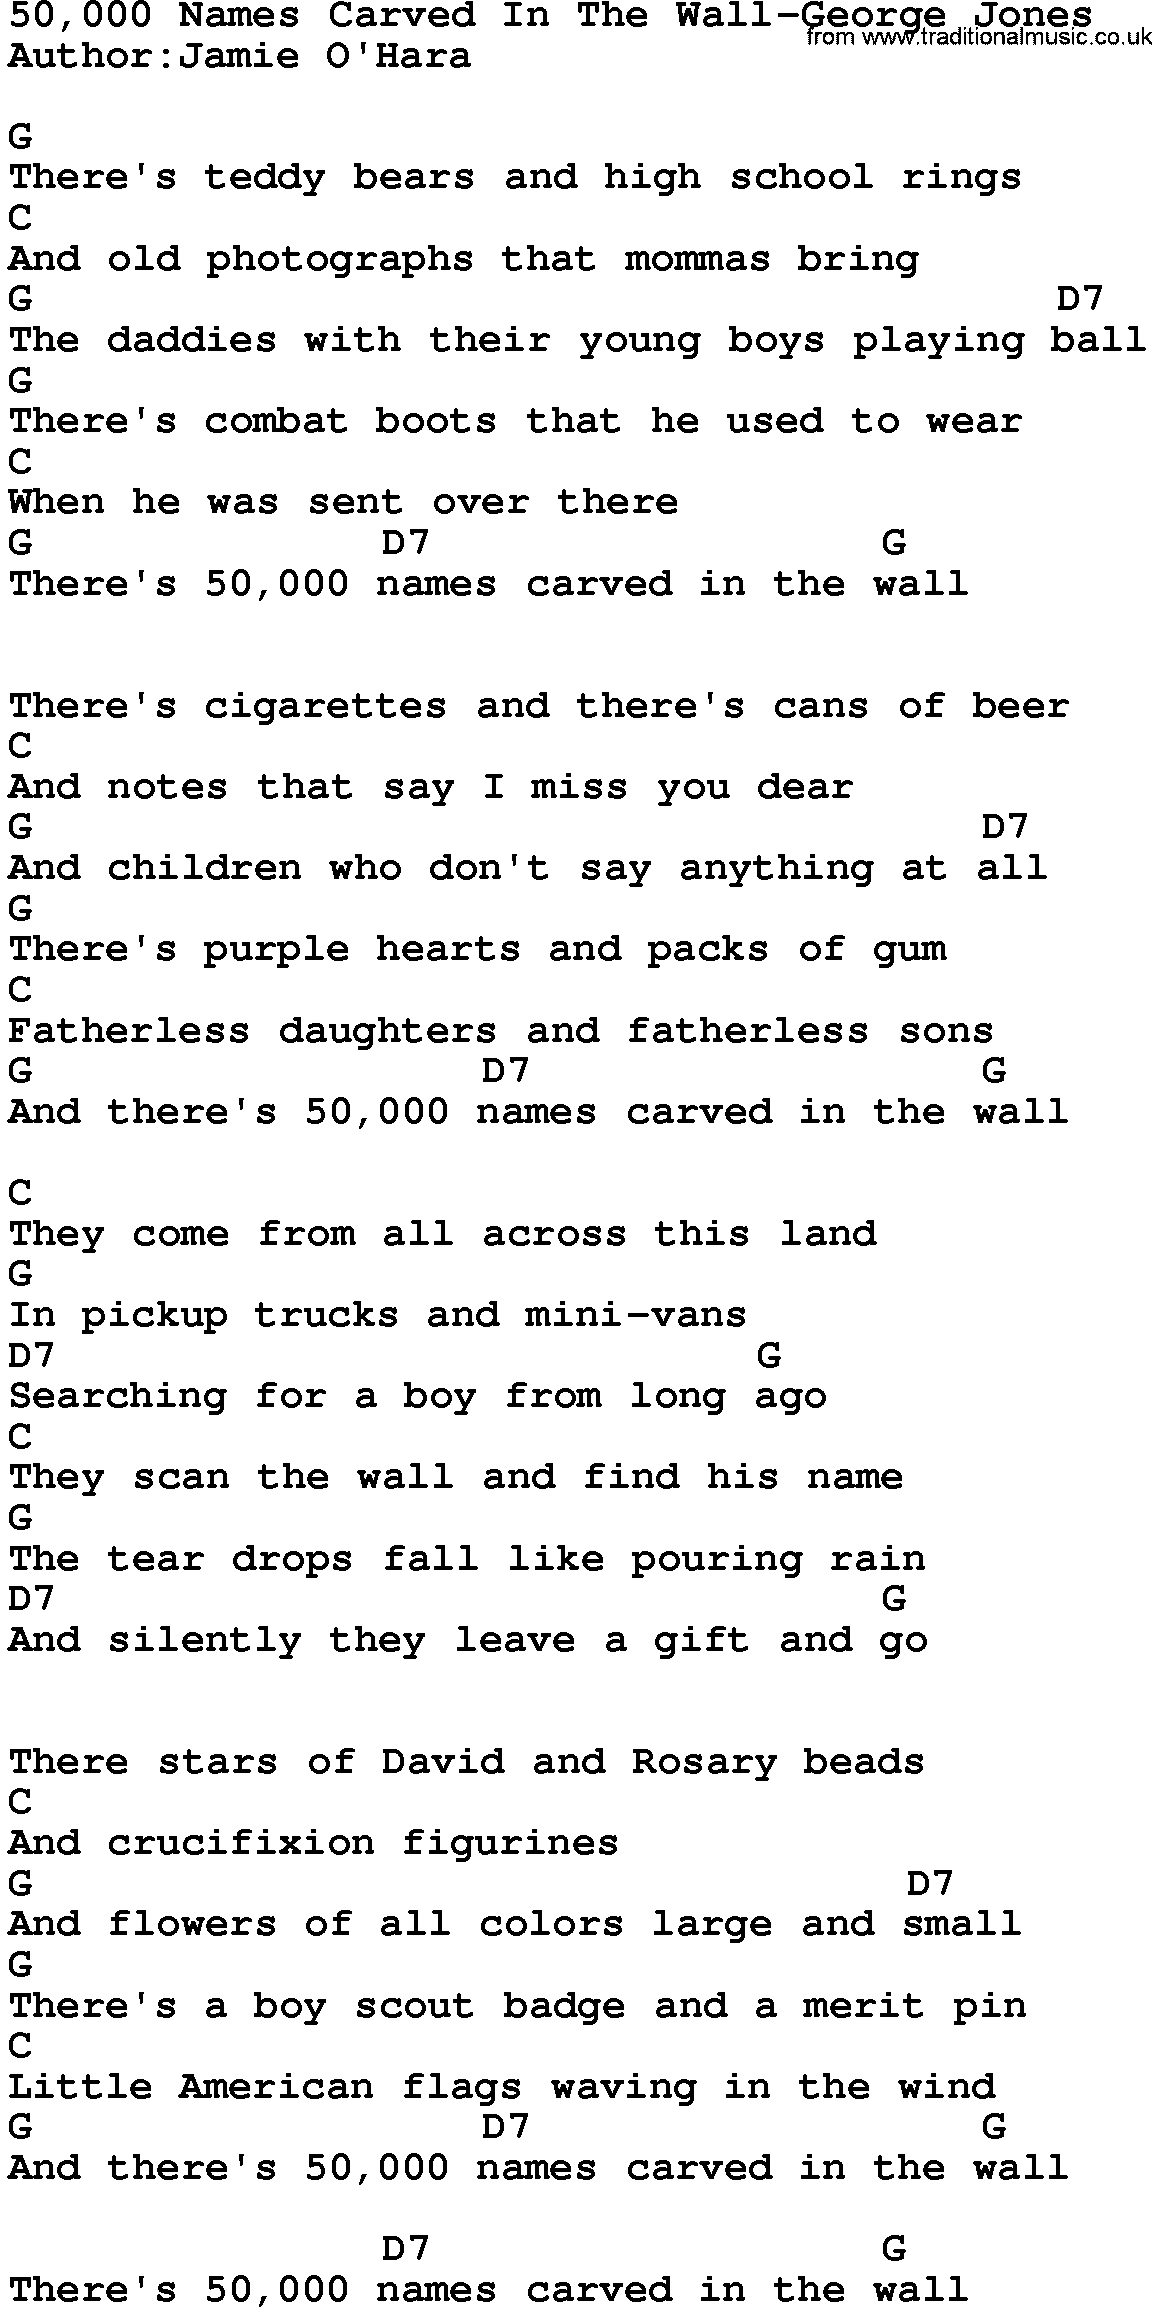 Country music song: 50,000 Names Carved In The Wall-George Jones lyrics and chords